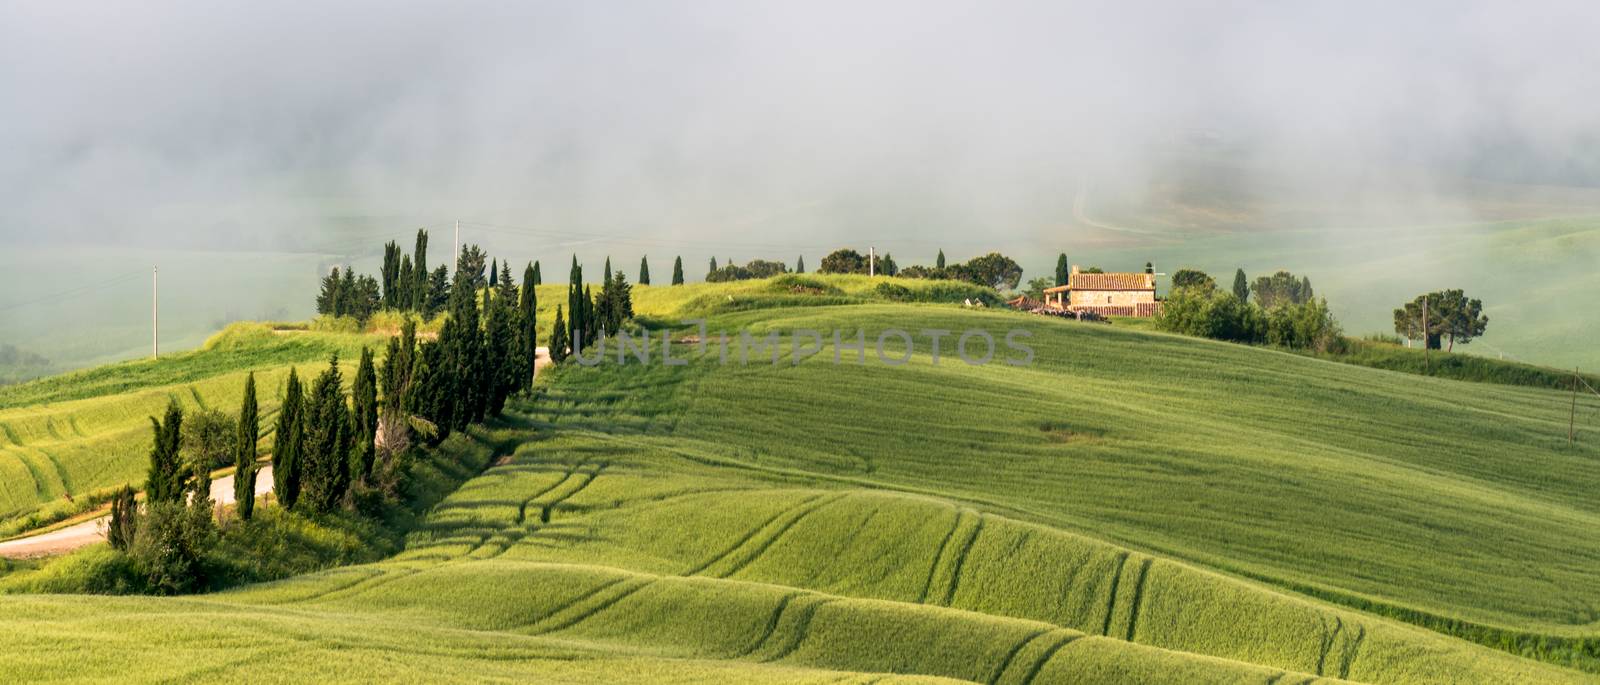 VAL D'ORCIA, TUSCANY/ITALY - MAY 22 : Scenery of Val d'Orcia in  by phil_bird